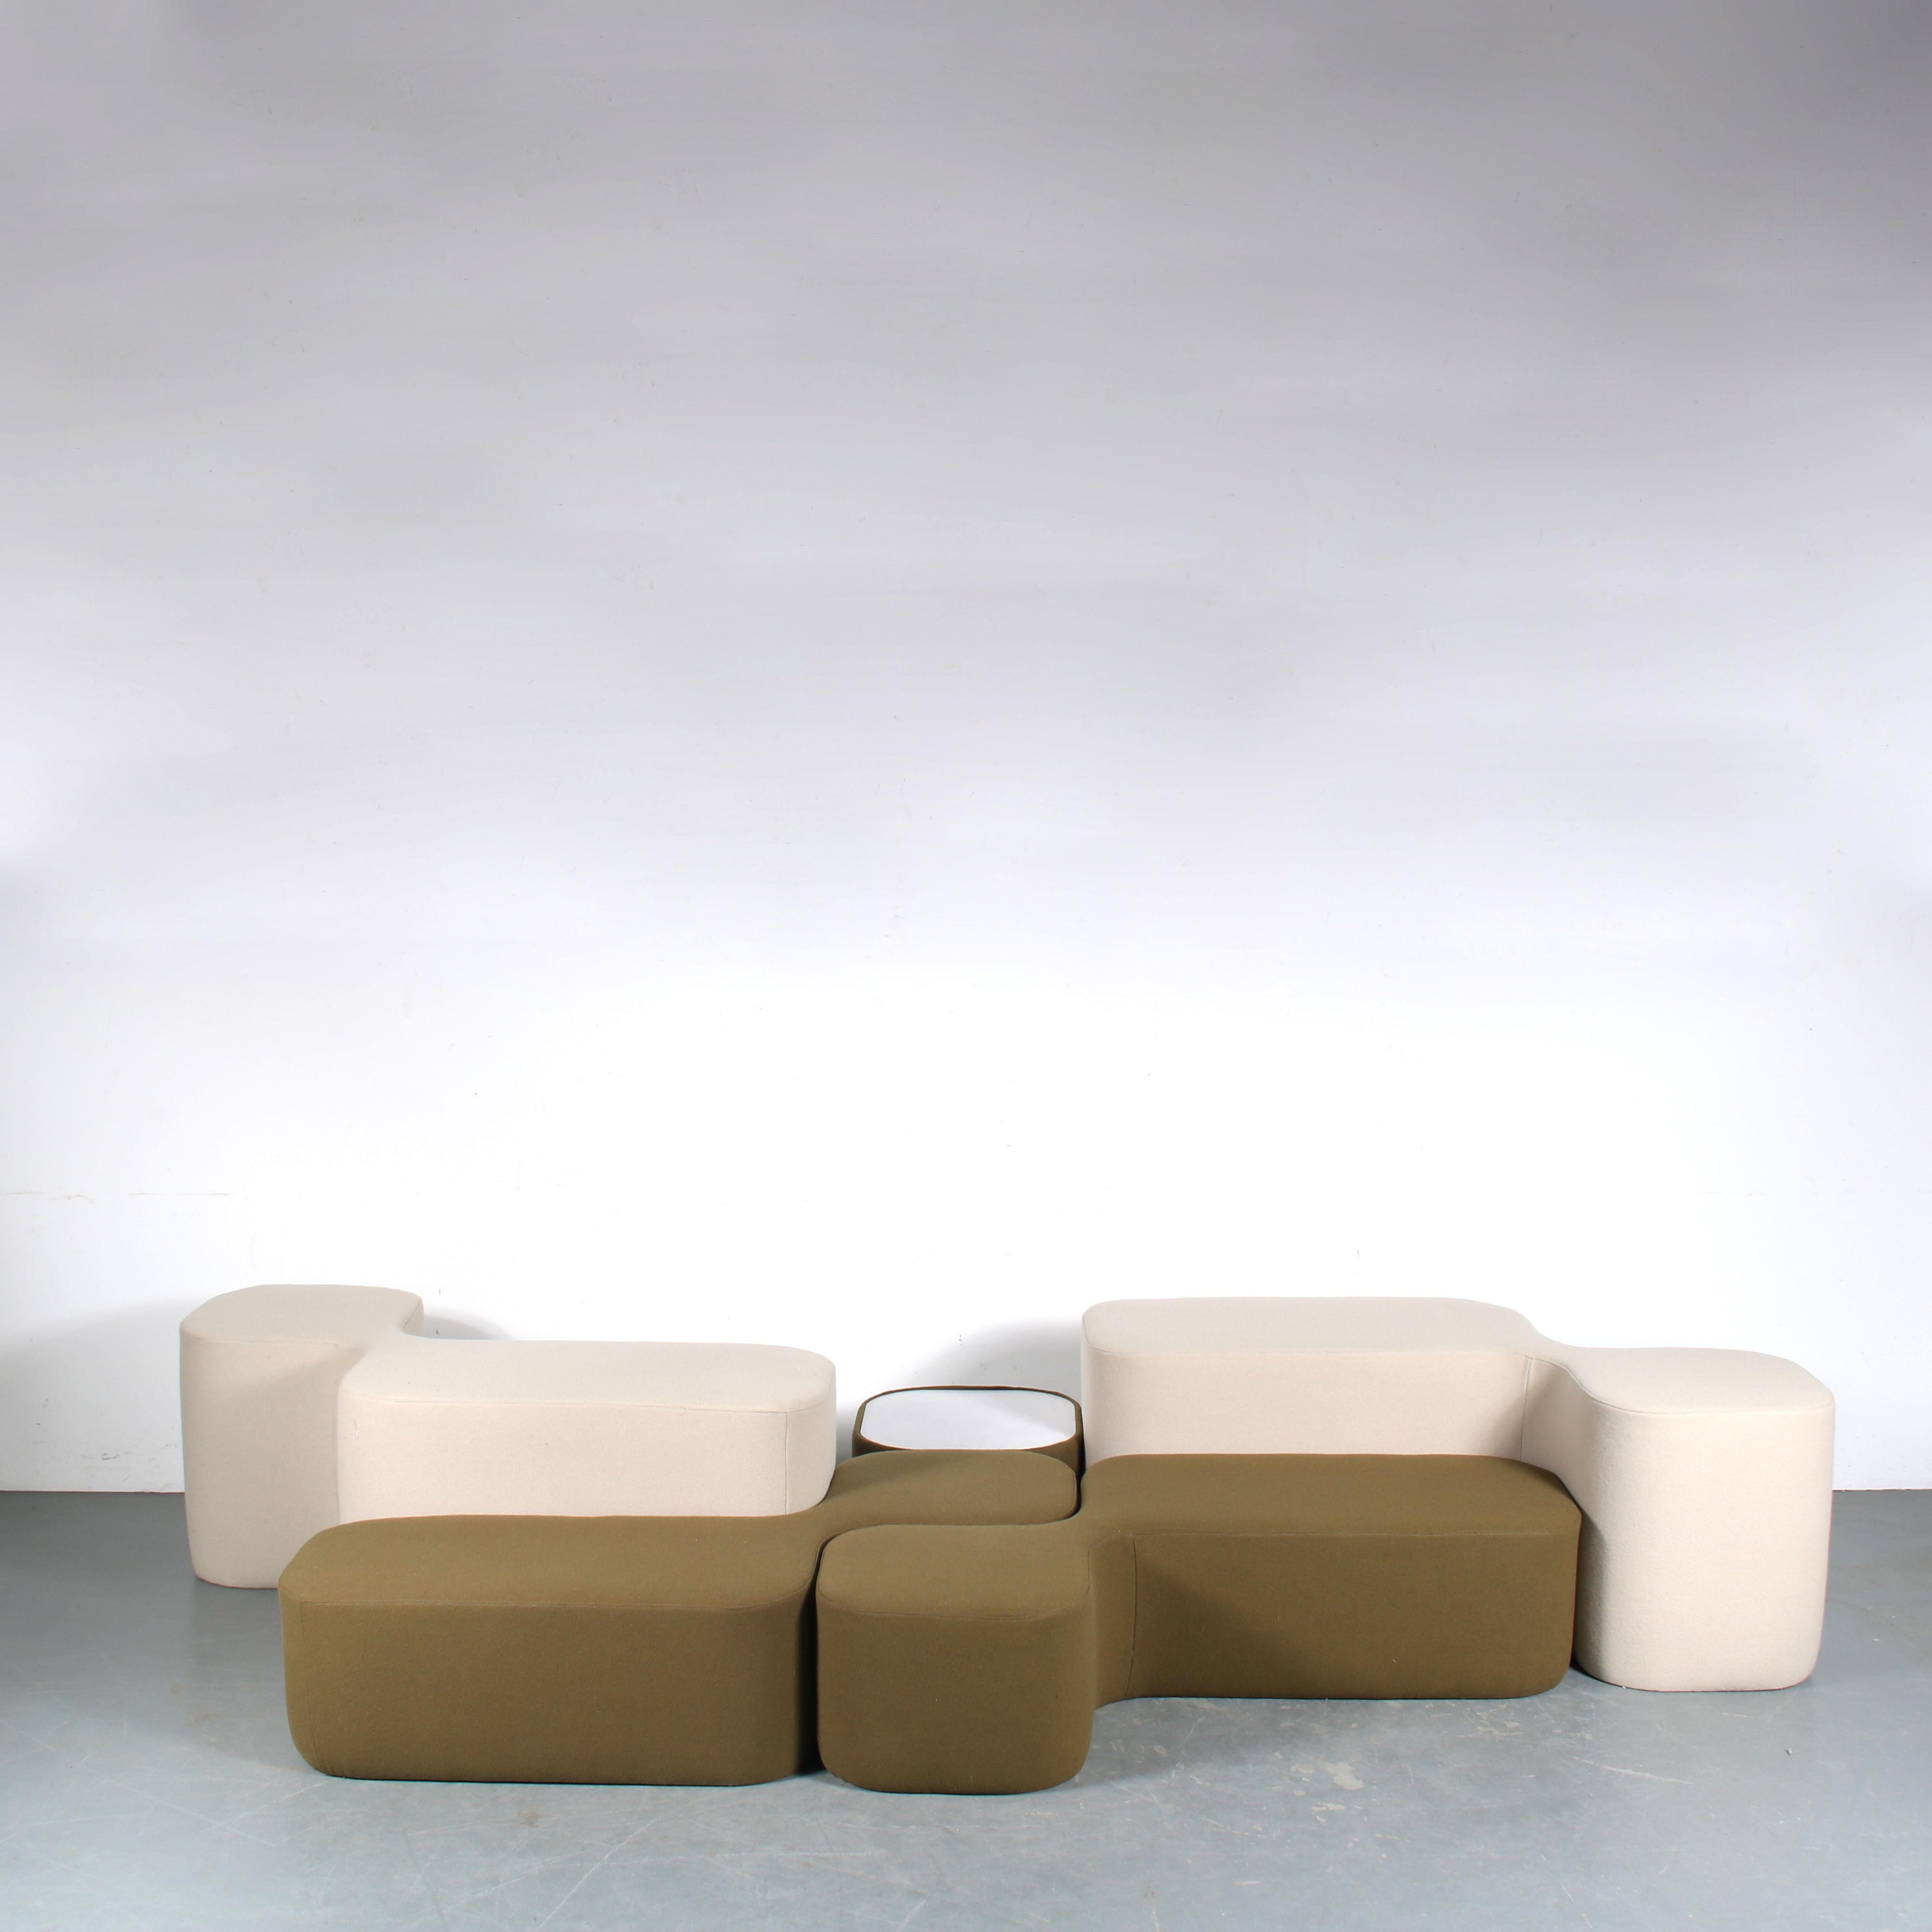 Late 20th Century Modular Living Room Set in Pierre Cardin Style, Italy, 1970 For Sale